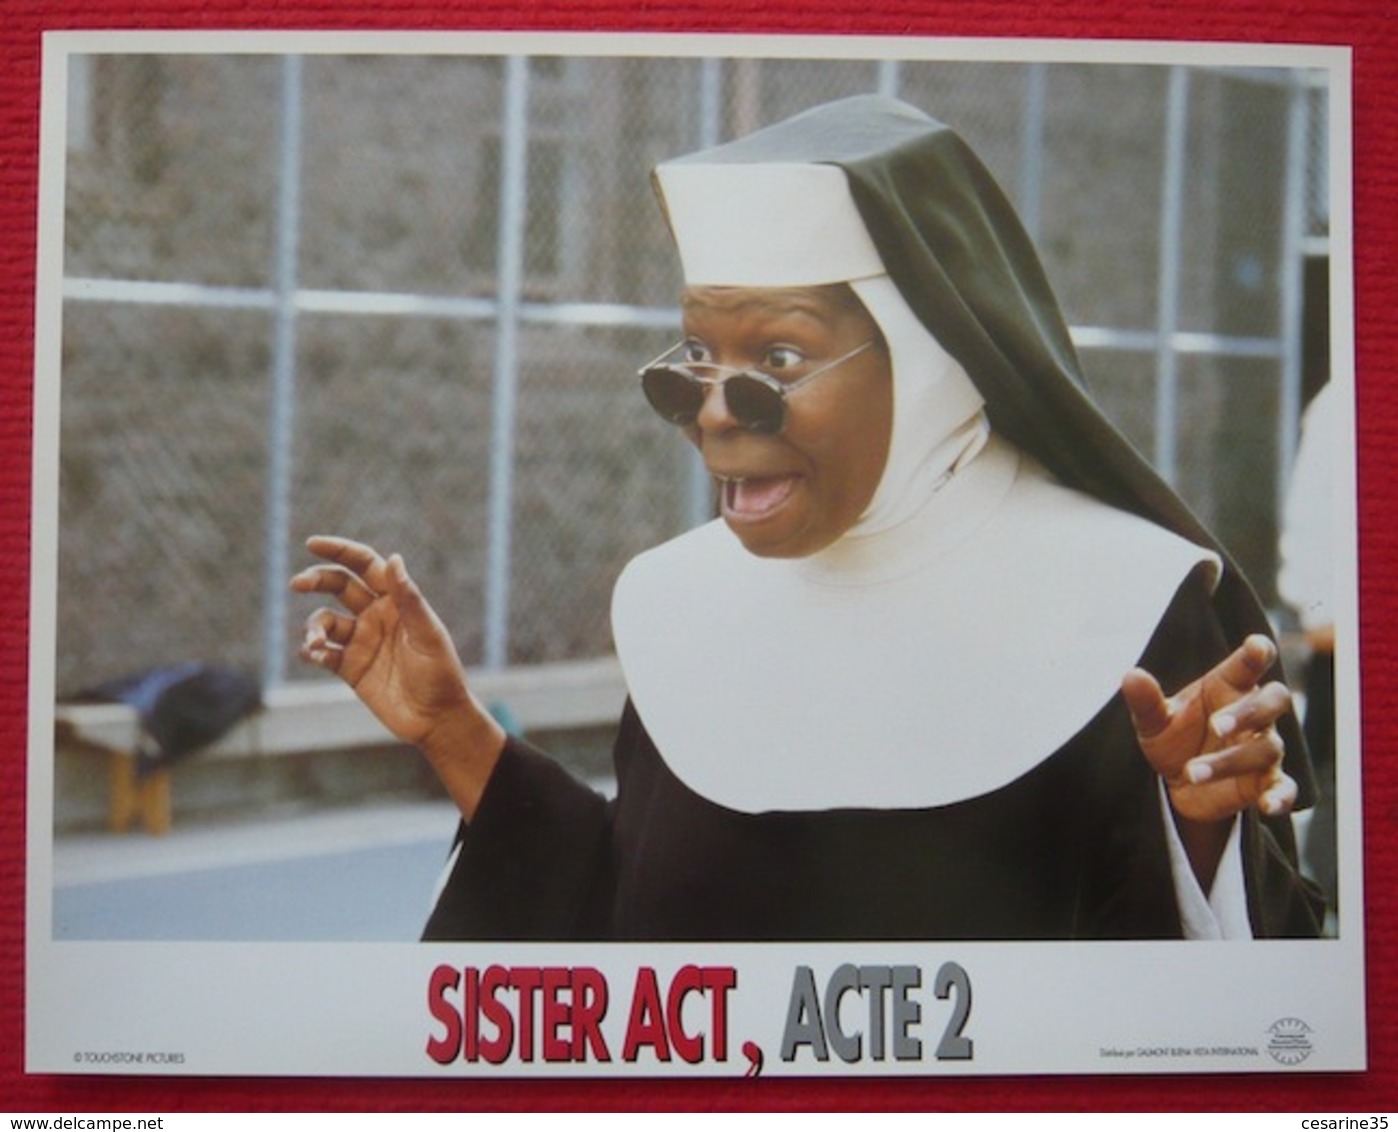 8 Photos Du Film Sister Act, Acte 2 (1993) - Whoopi Goldberg - Albums & Collections